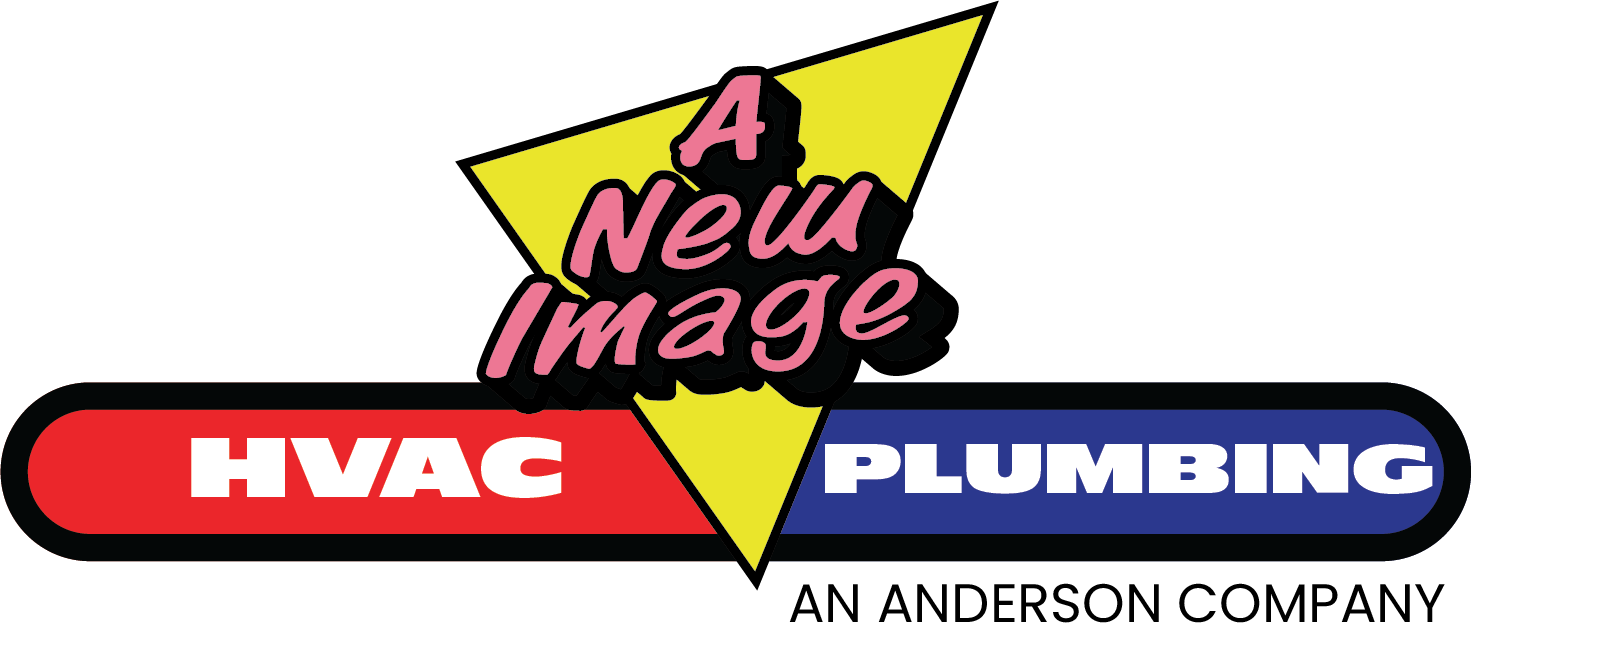 a new image and plumbing